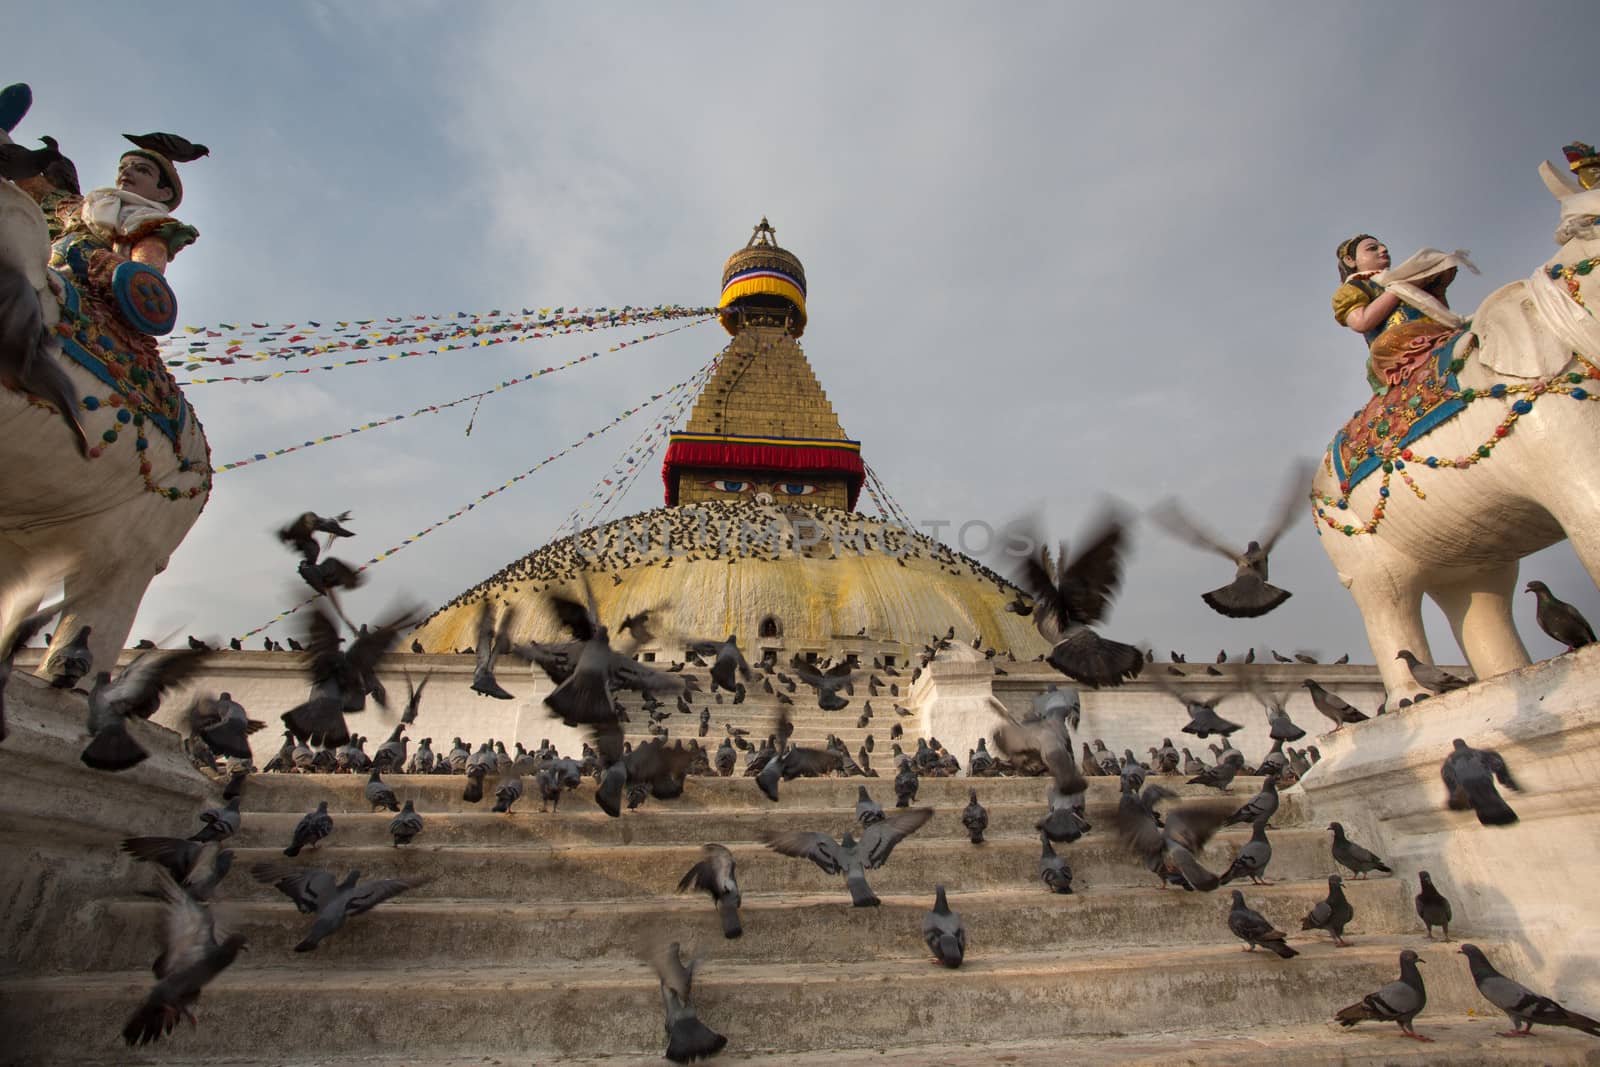 Crowding of pigeons flying over the great Bodhnath stupa in Kathmandu, Nepal.